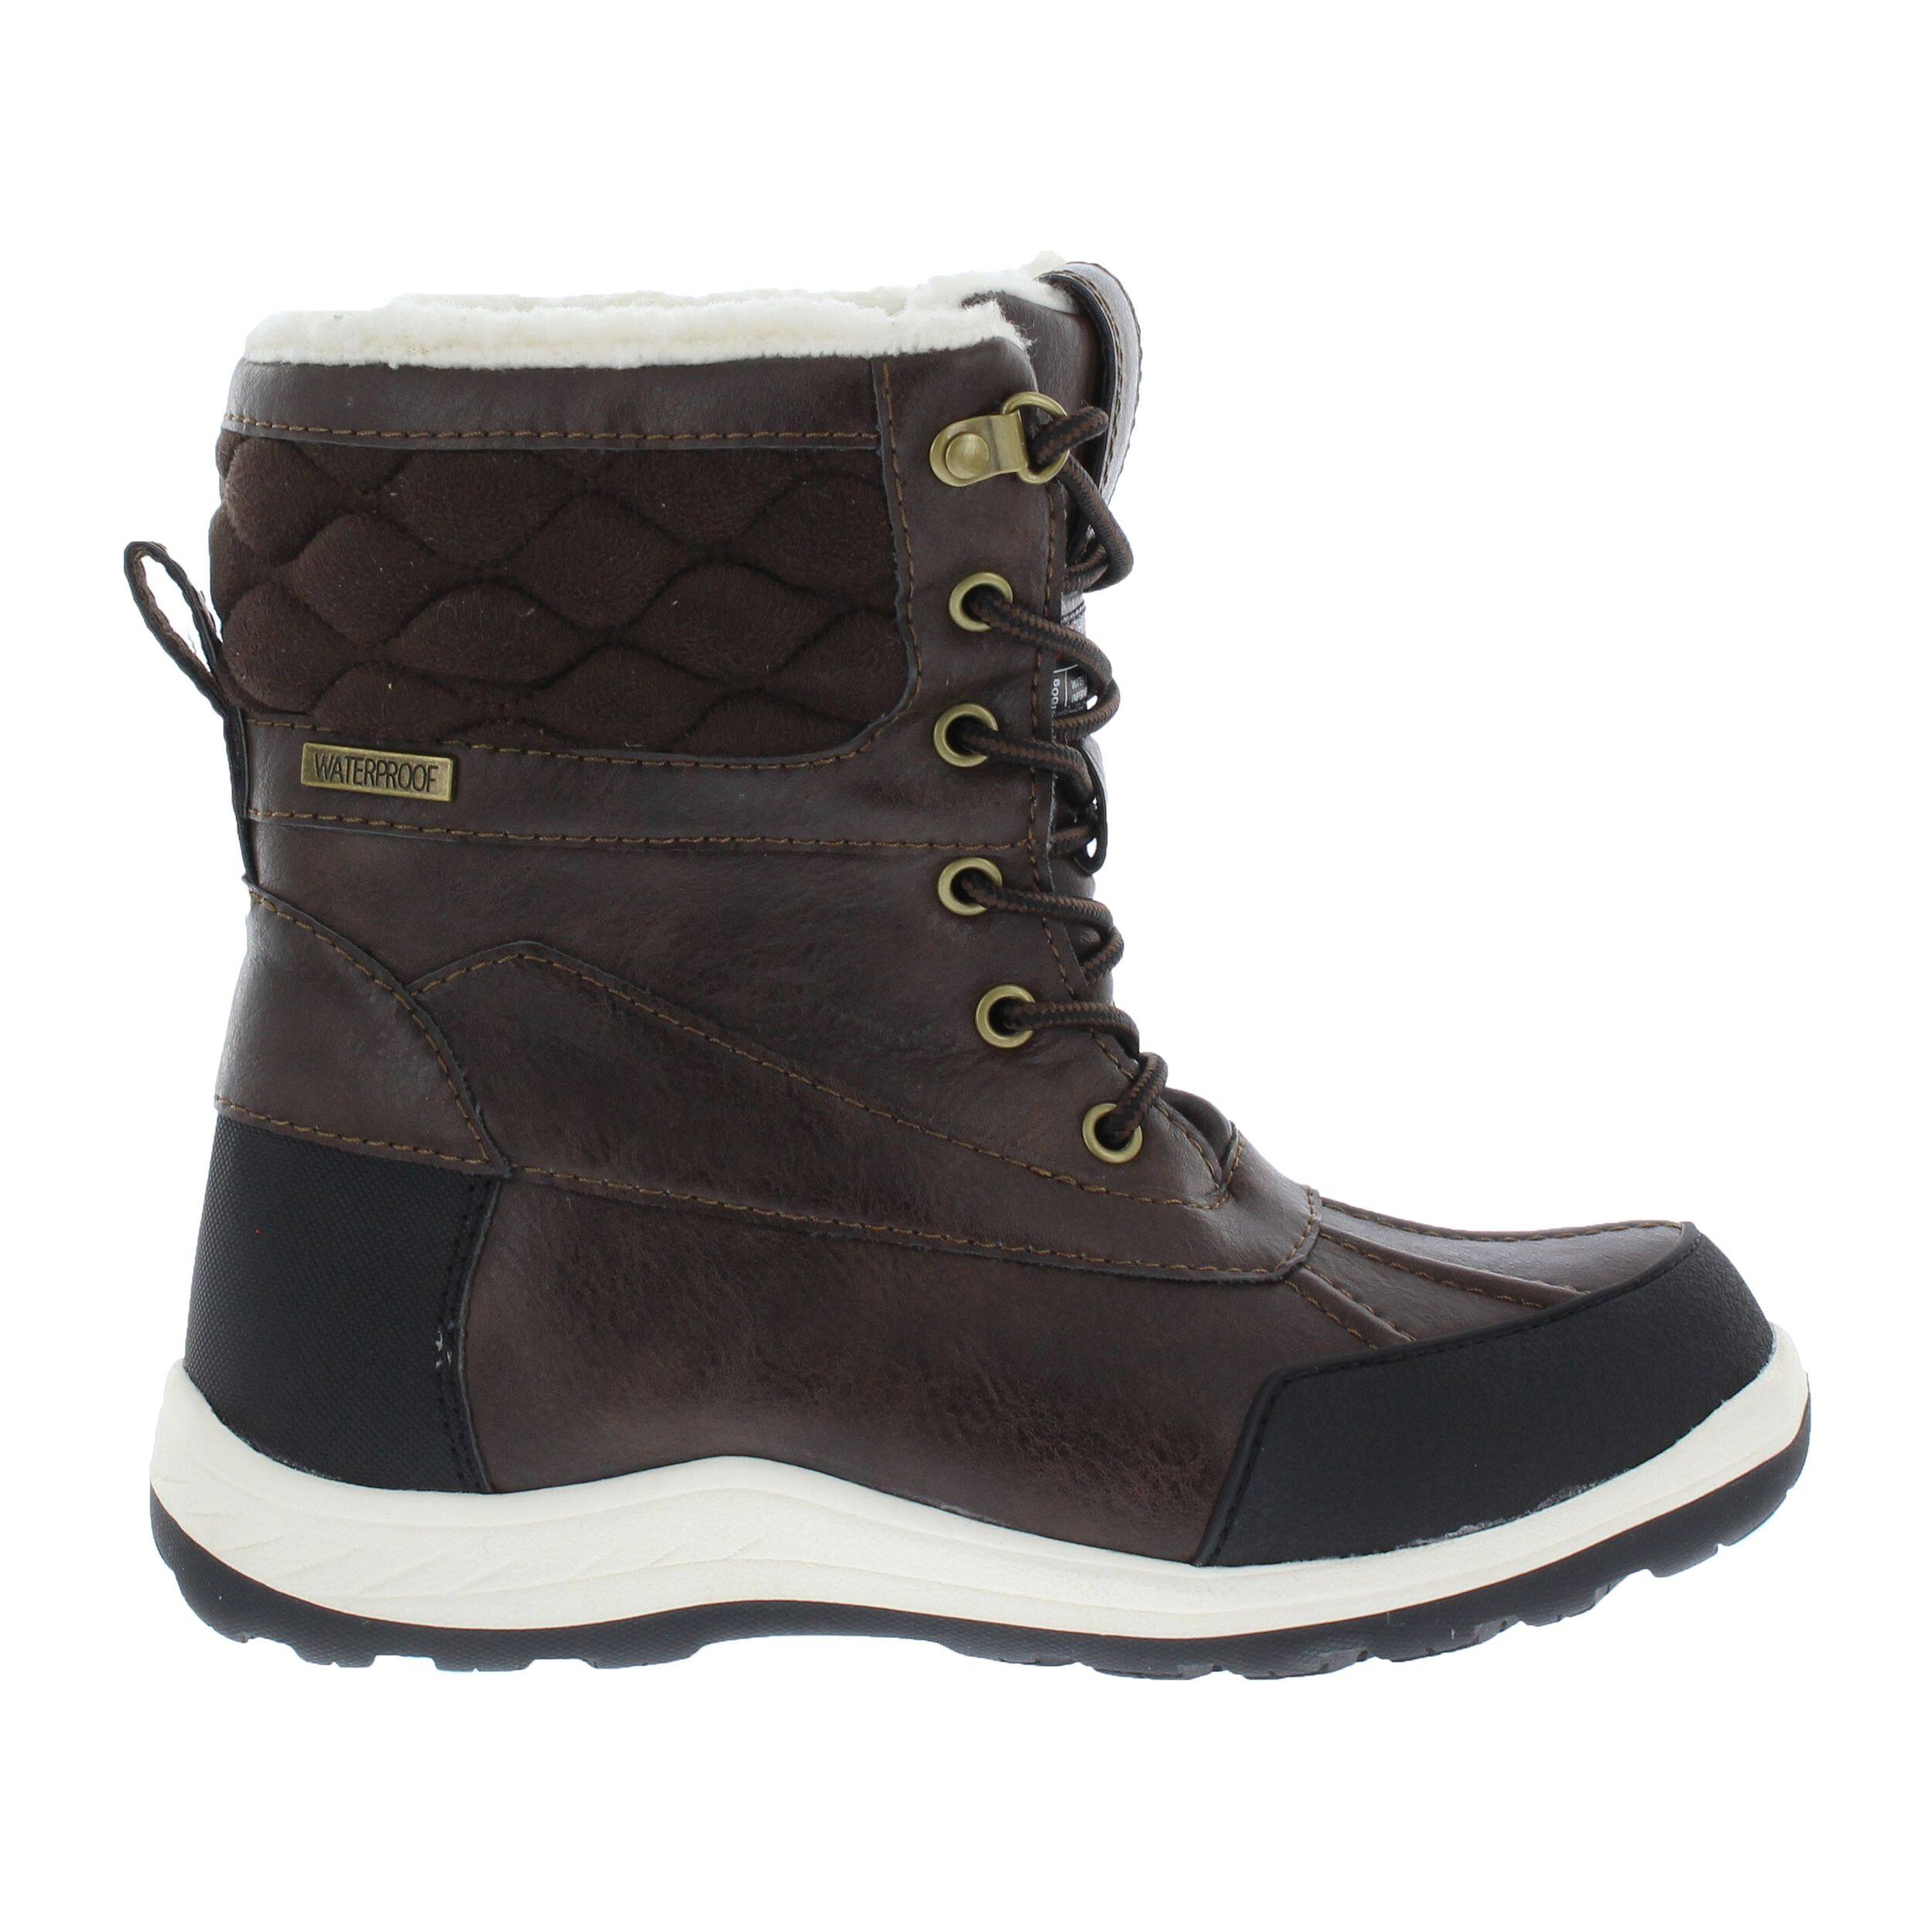 Outbound Women's Snowfall Insulated Winter Boots | Canadian Tire